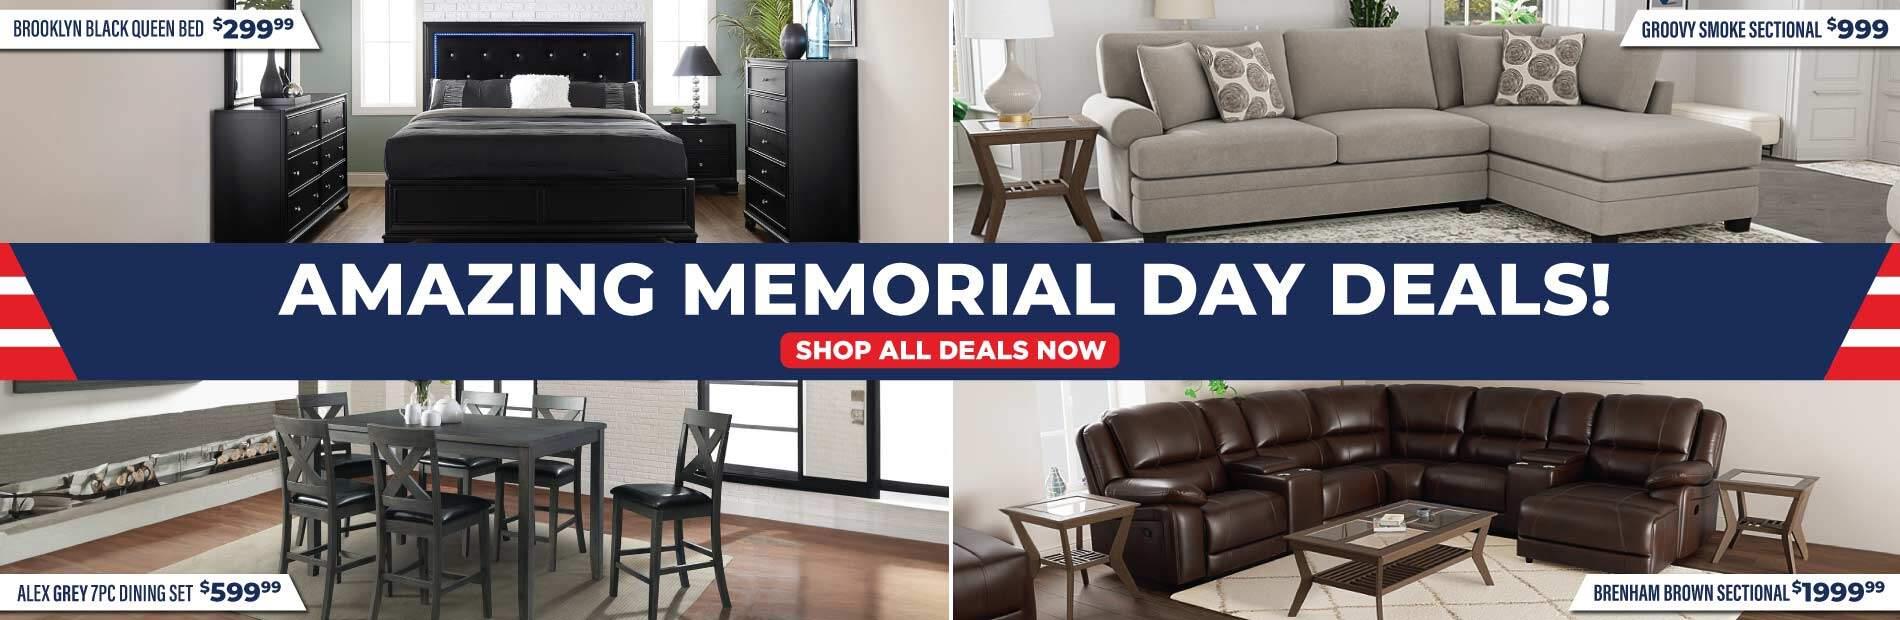 Amazing Memorial Day Deals. Shop All Deals Now. Brooklyn Queen Bed $299, Groovy Smoke Sectional $999, Alex 7PC Dining Set 599.99, Brenham Brown Sectional $1999.99.